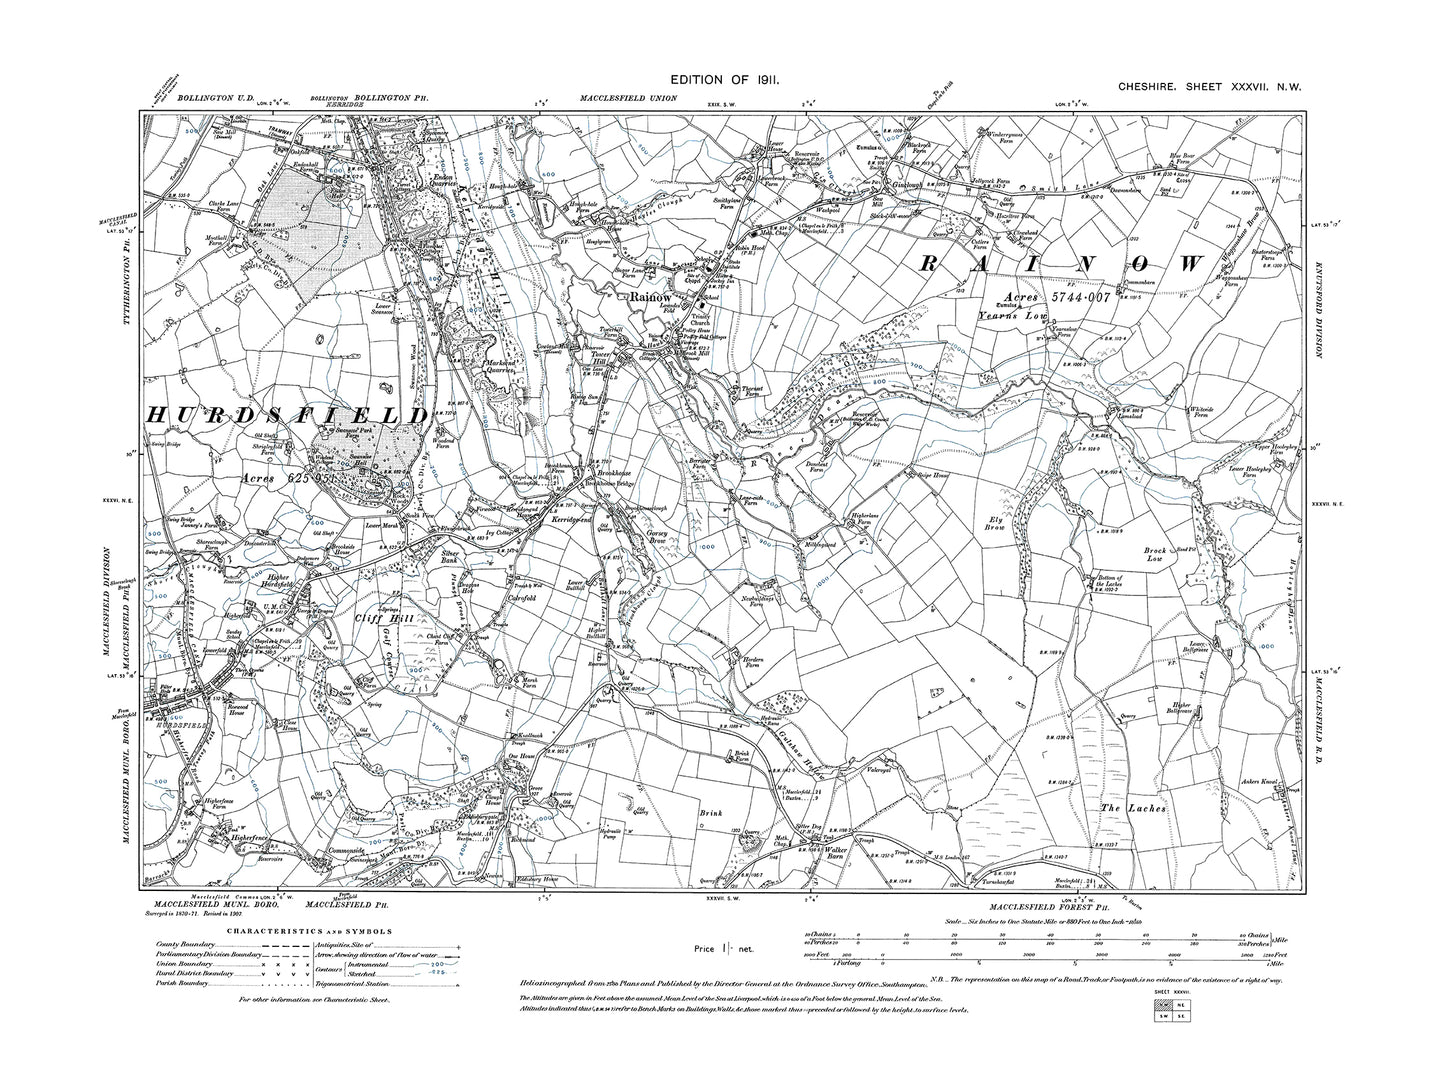 Old OS map dated 1911, showing Macclesfield (northeast), Bollington (south), Rainow in Cheshire 37NW